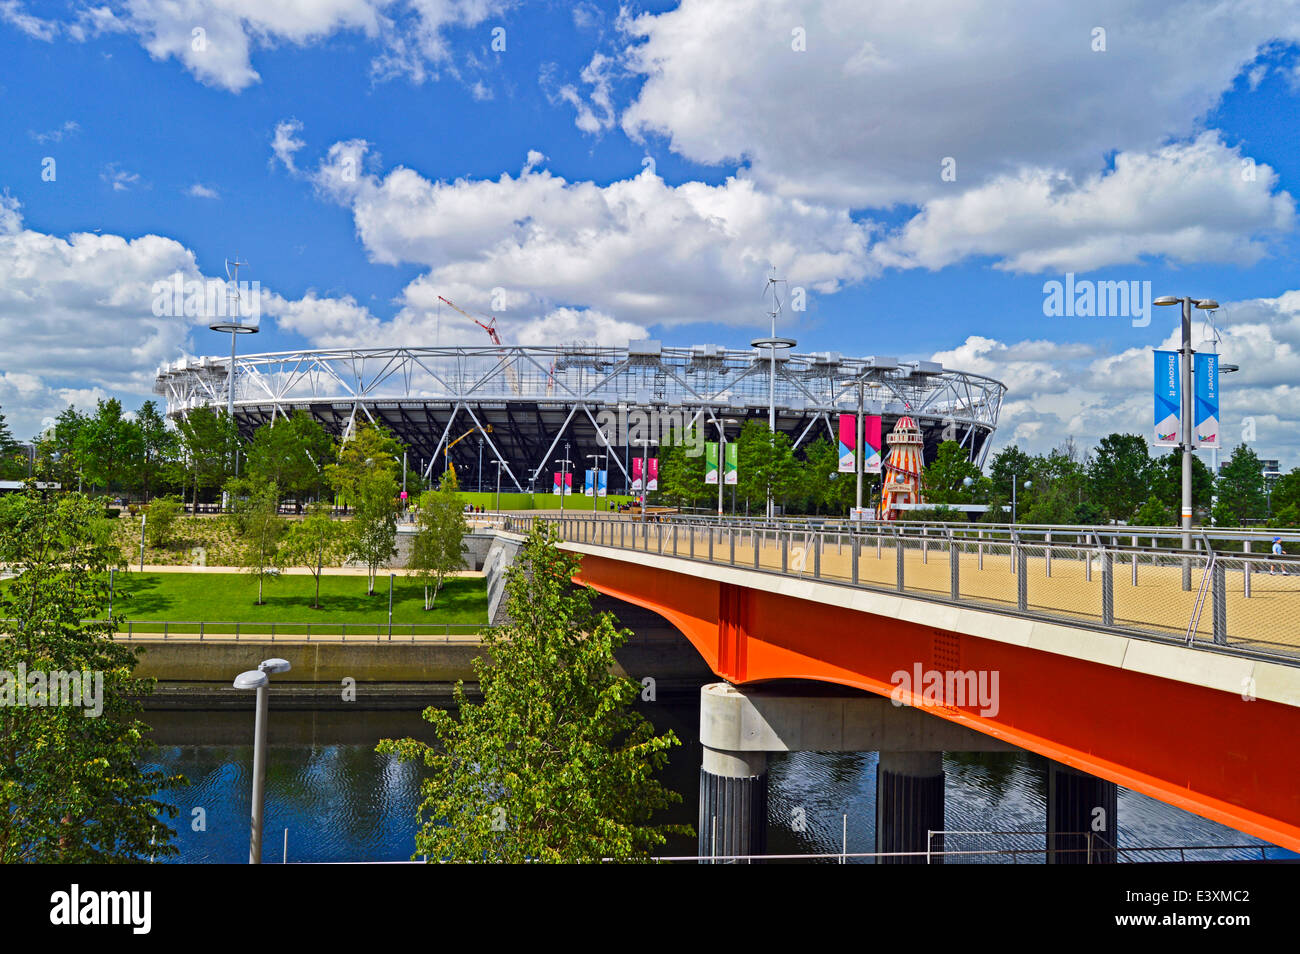 The Olympic Stadium at the Queen Elizabeth Olympic Park, Stratford, London, England, United Kingdom Stock Photo